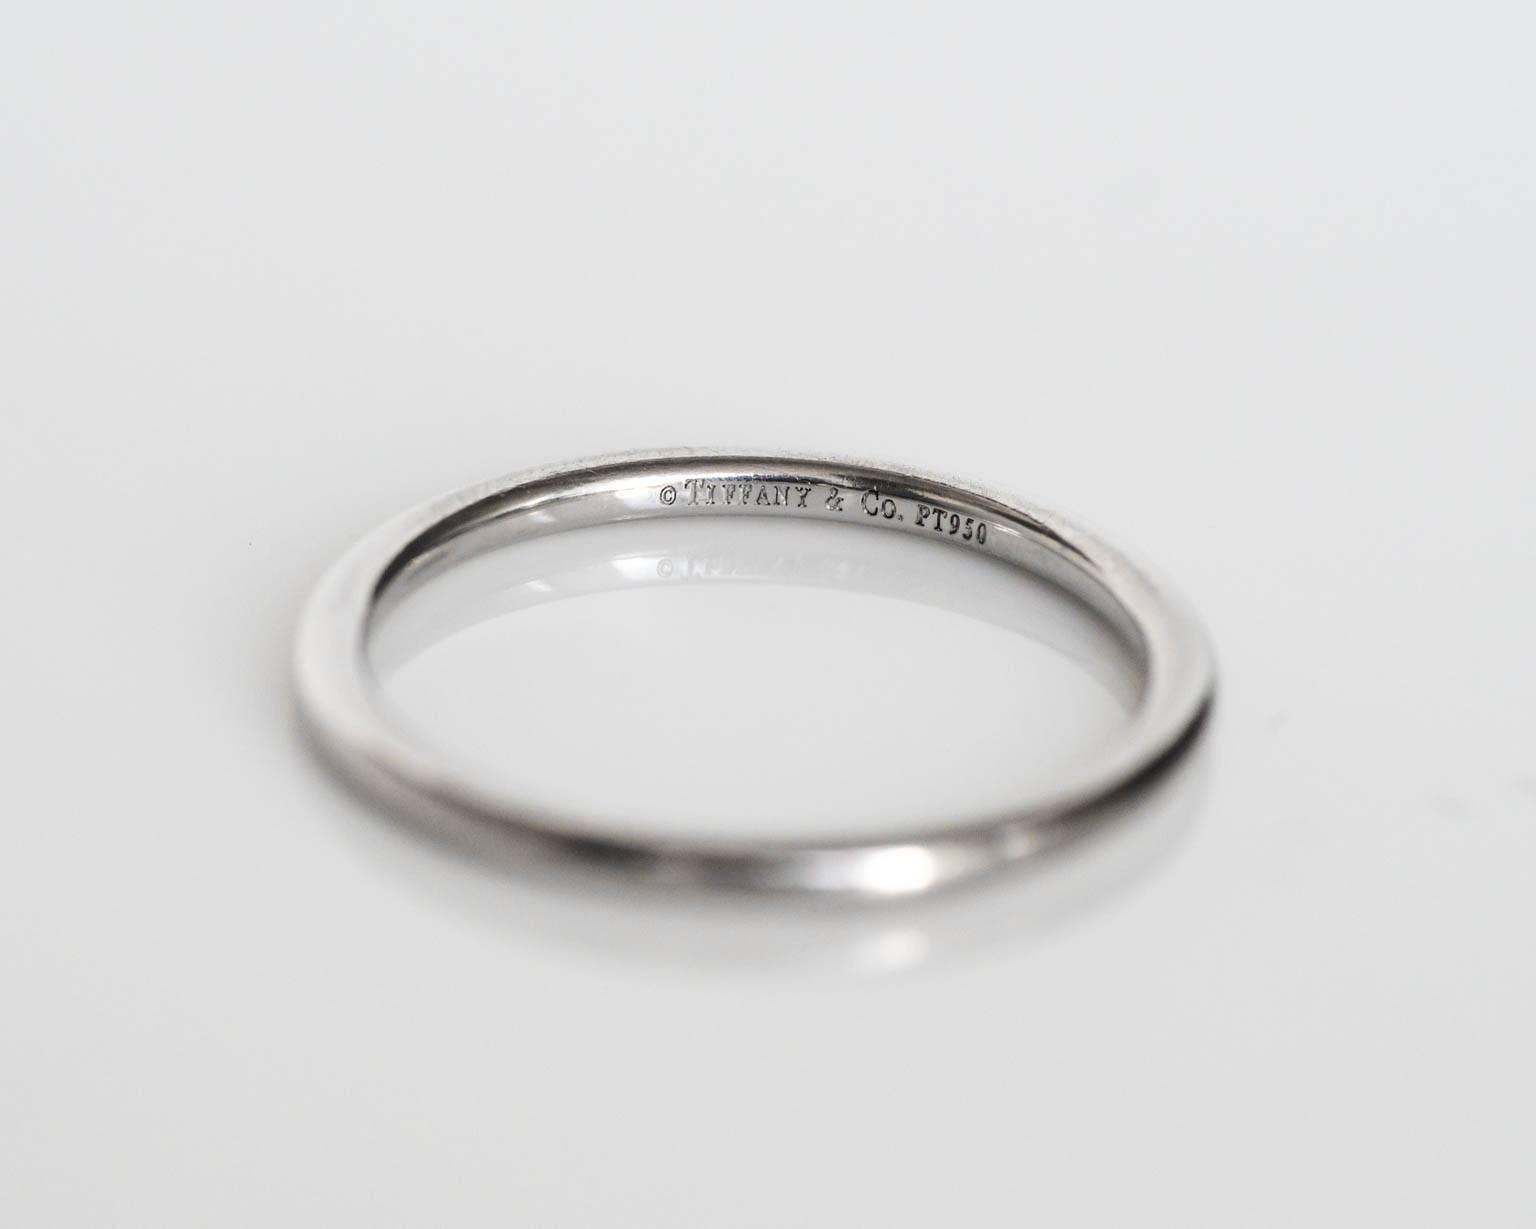 Here is an awesome Platinum TIFFANY & CO. wedding band. Ultra classic!  A great piece to compliment an engagement ring, or to even stack with other bands or wear alone!

This ring can be sized up or down 1 size for an additional $30. If you wish